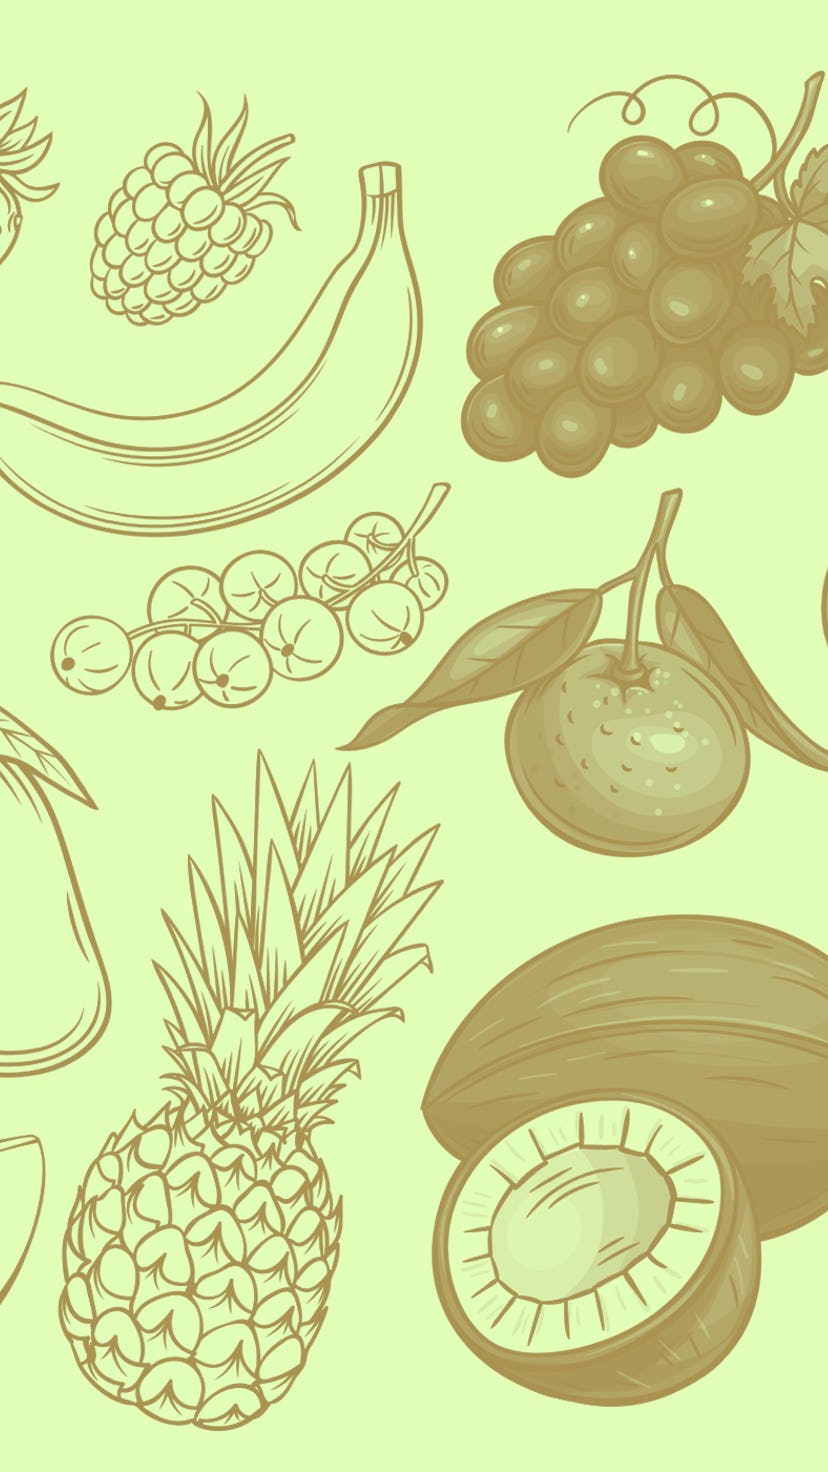 Fruit and berries drawn icons vector set. Illustration of colored and monochrome fruits for design f...